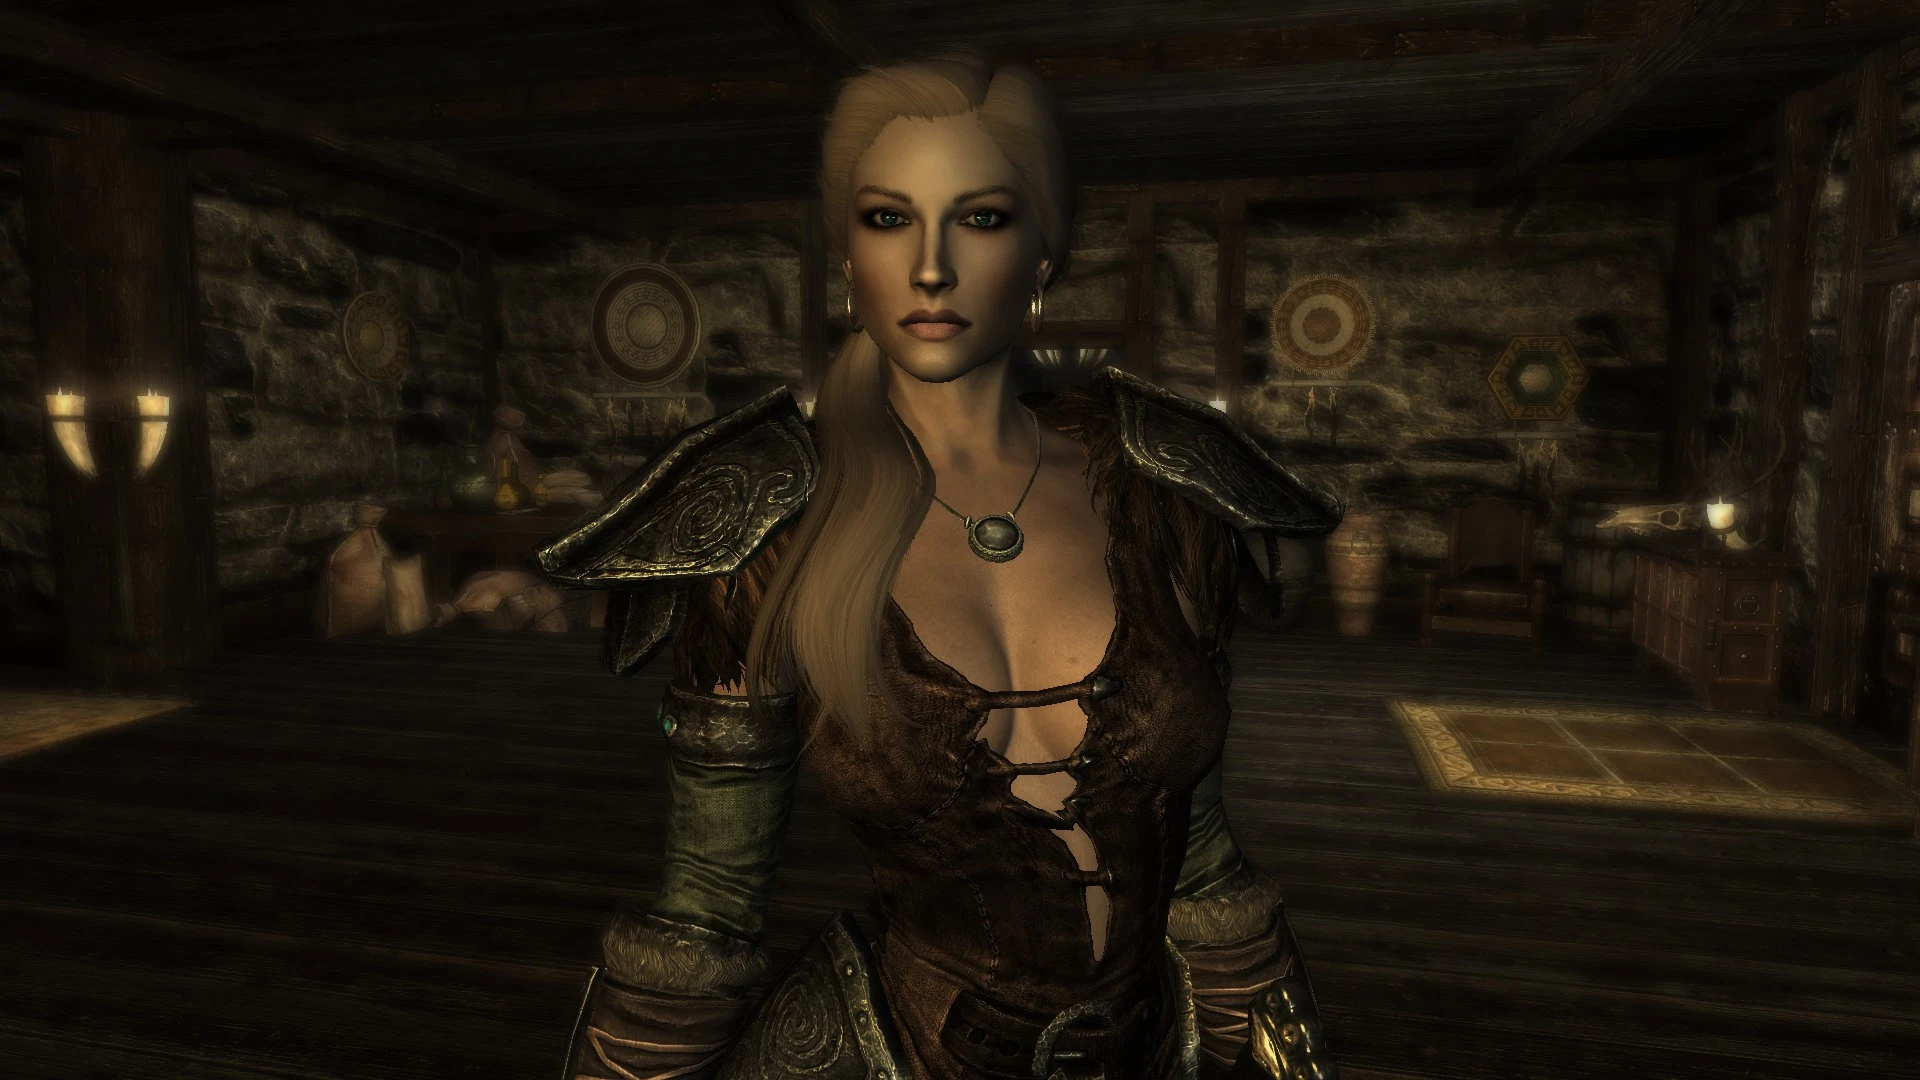 Oblivion Hair Pack Fixed Now With Npceditor Support At Skyrim Nexus Mods And Community